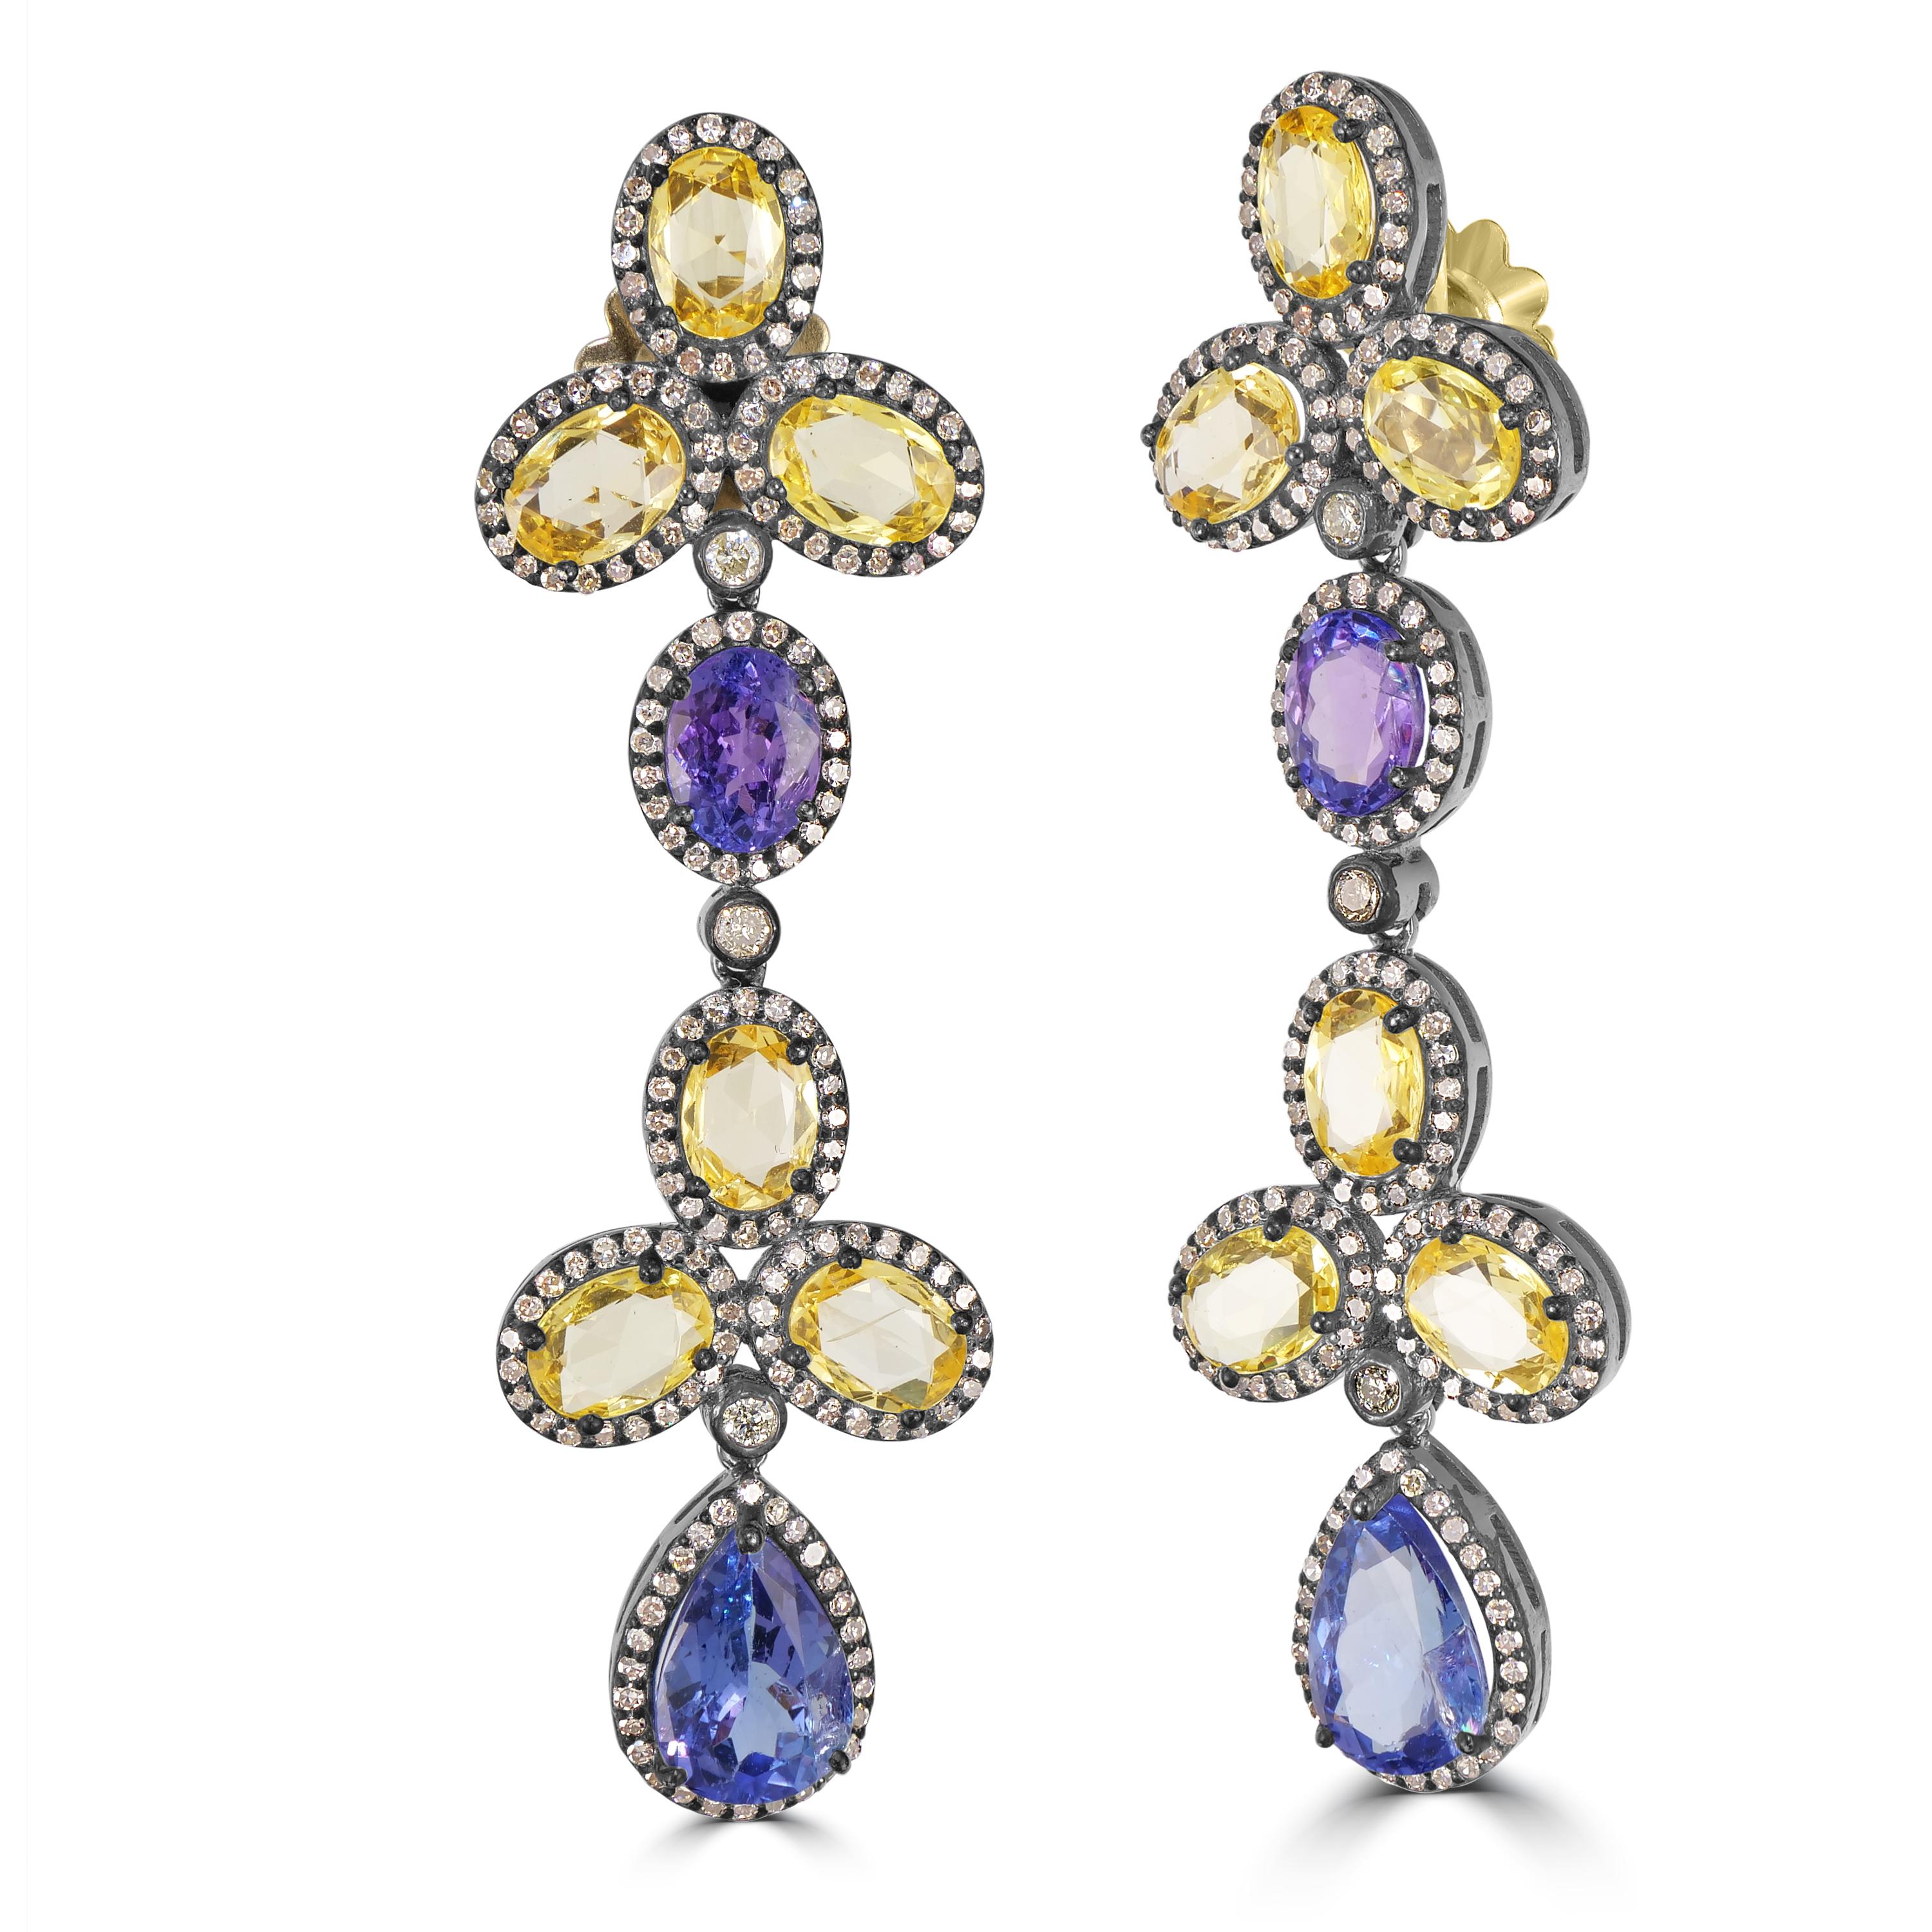 Introducing the exquisite Victorian 24.87 Cttw. Tanzanite, Yellow Sapphire, and Diamond Dangle Earrings—a masterpiece that seamlessly blends elegance with a touch of vibrant luxury.

At the heart of these earrings are three leaf clovers, crafted